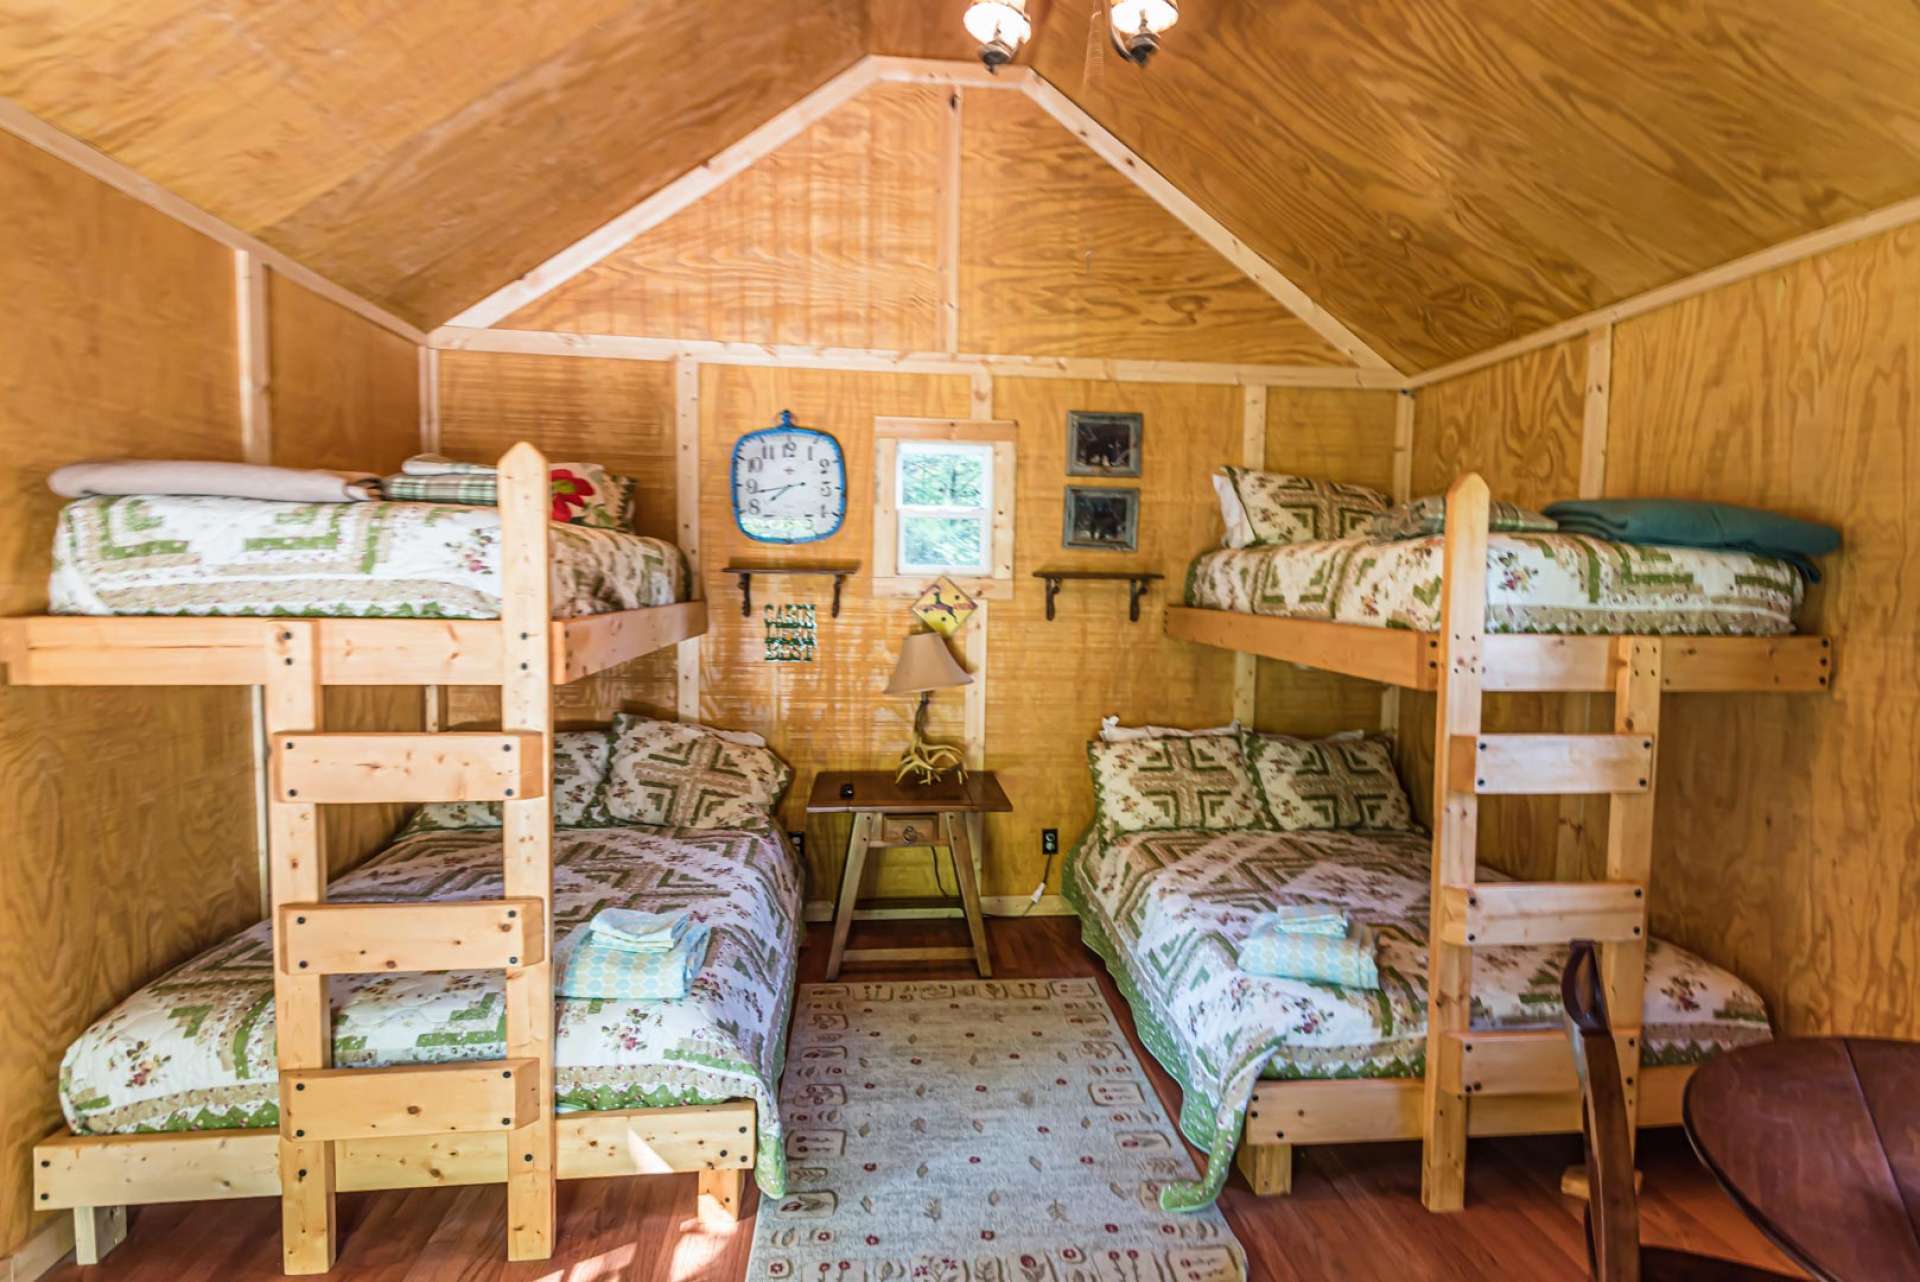 Your guests will adore this little bunkhouse with plenty of space for sleeping, snacking and TV time.